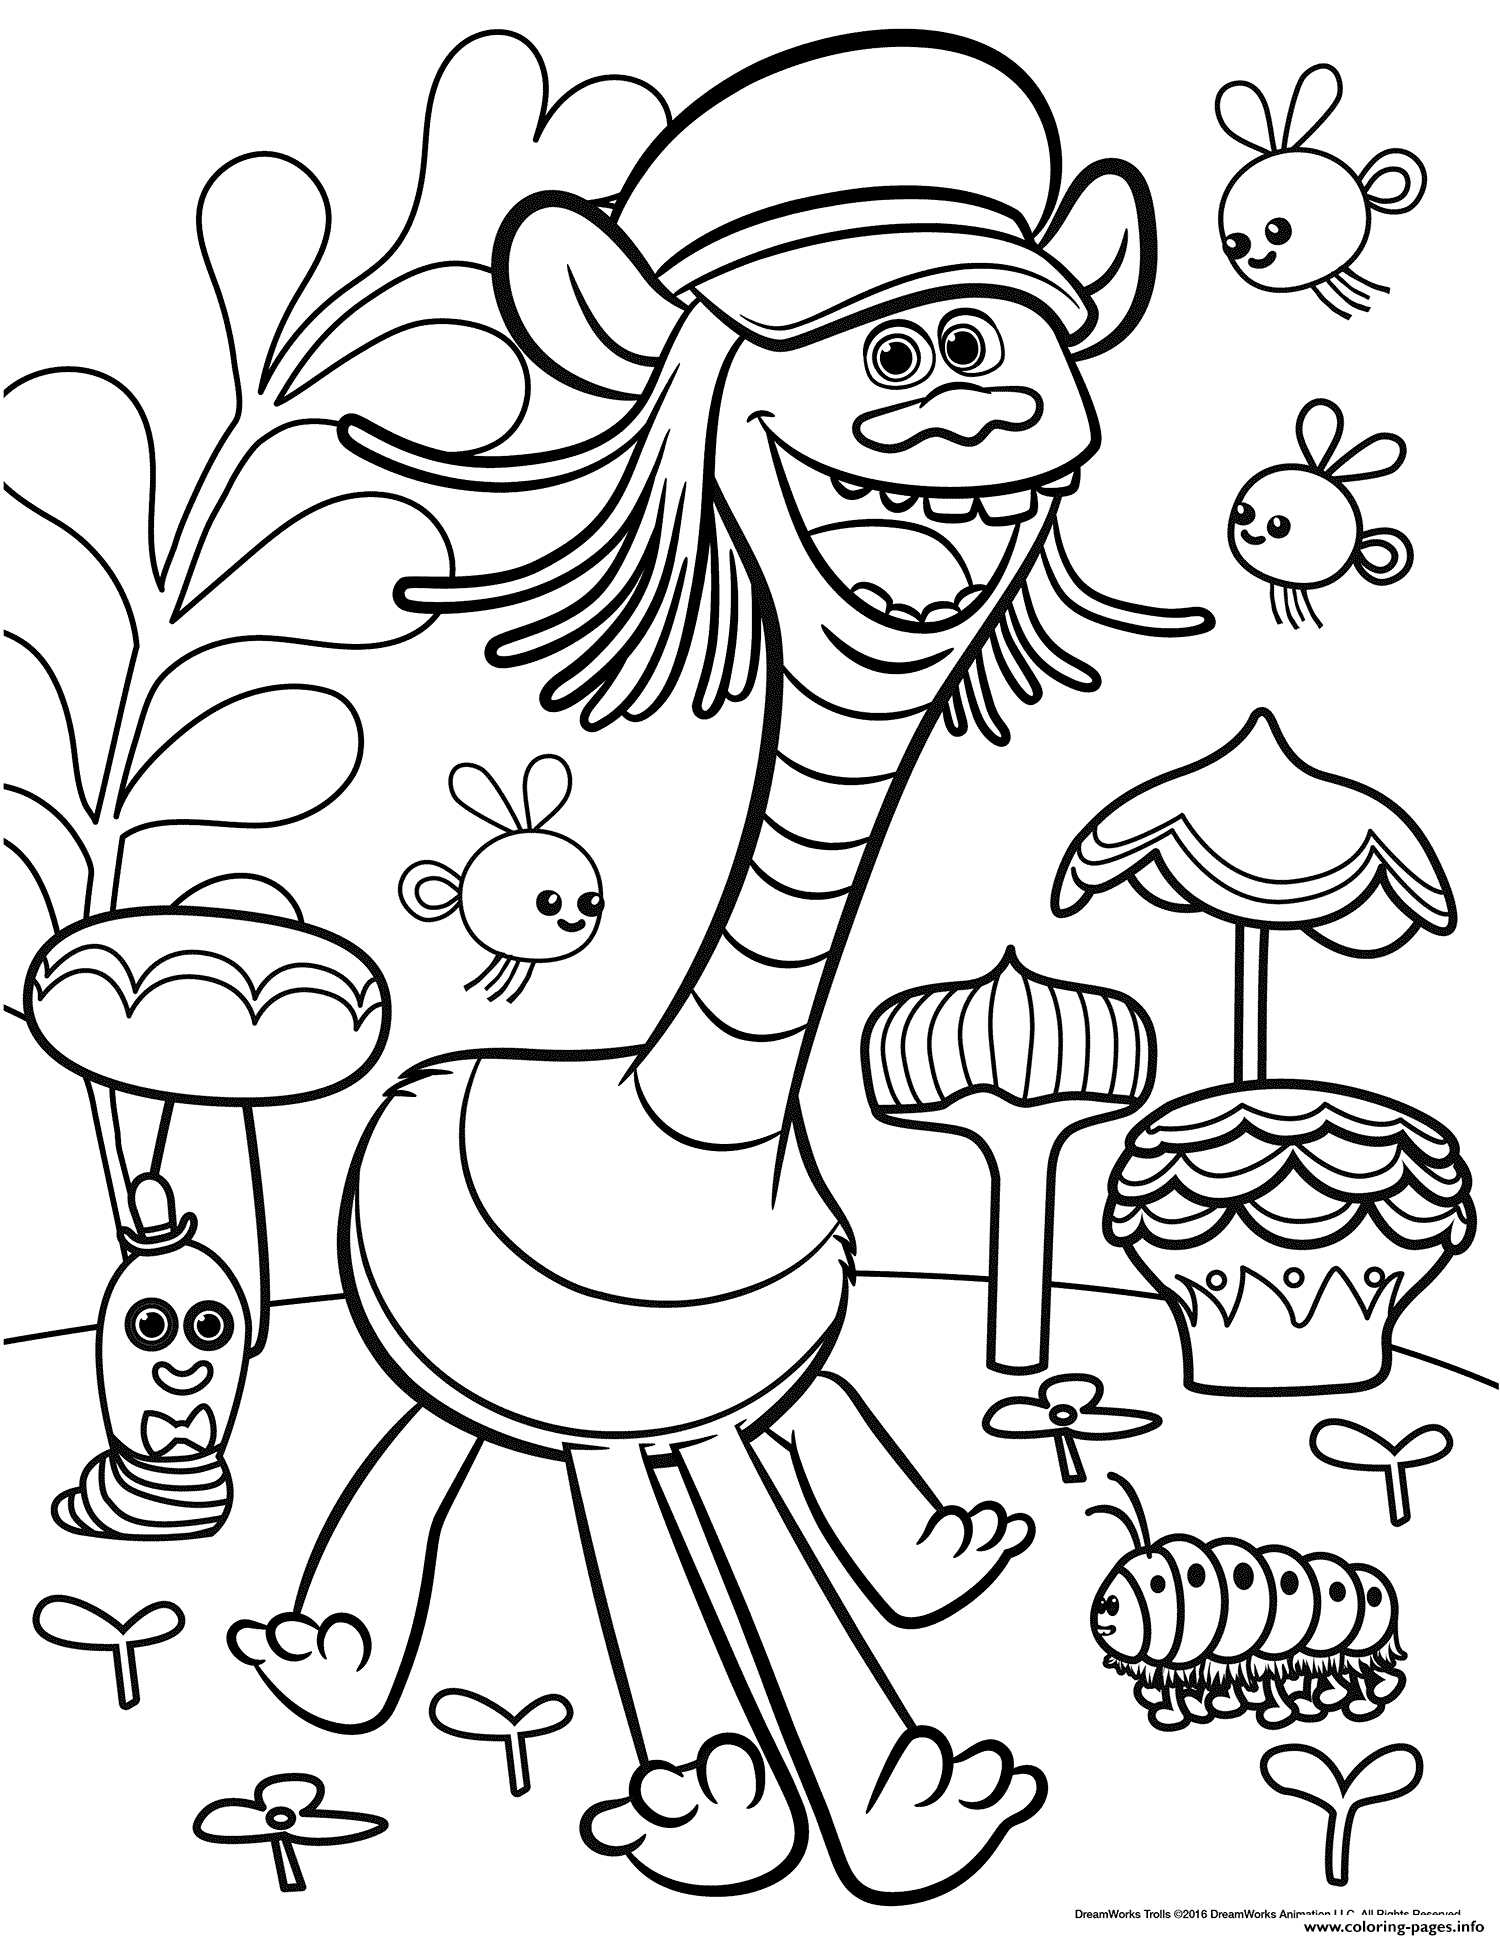 Trolls Movie Coloring Pages Trolls Movie Color Troll Coloring Pages Printable